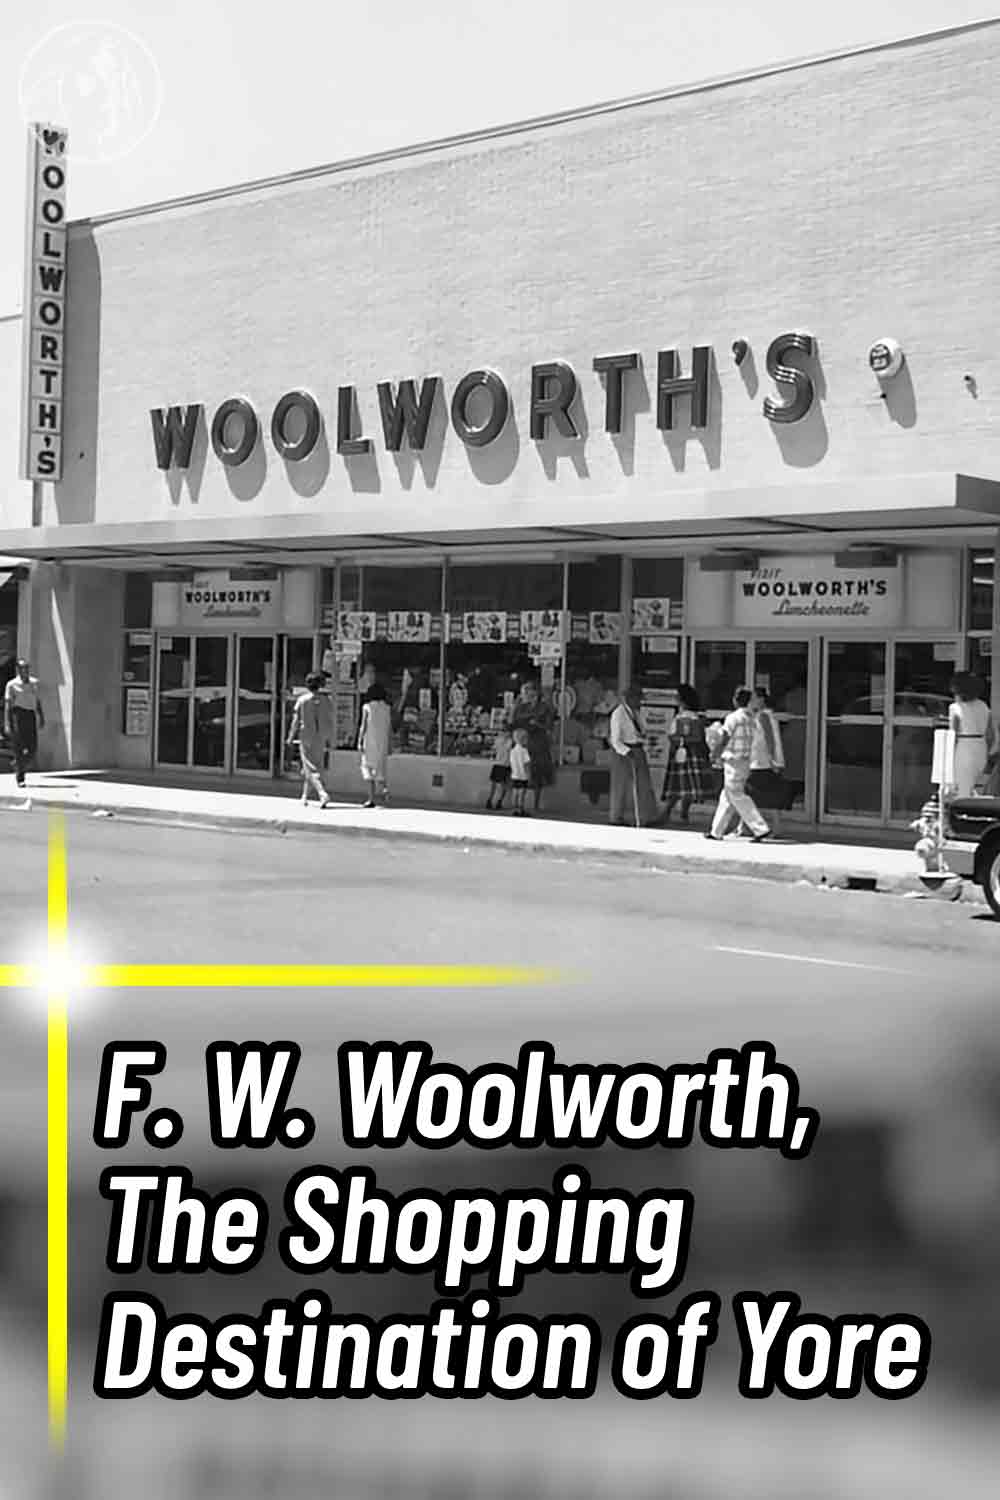 F. W. Woolworth, The Shopping Destination of Yore